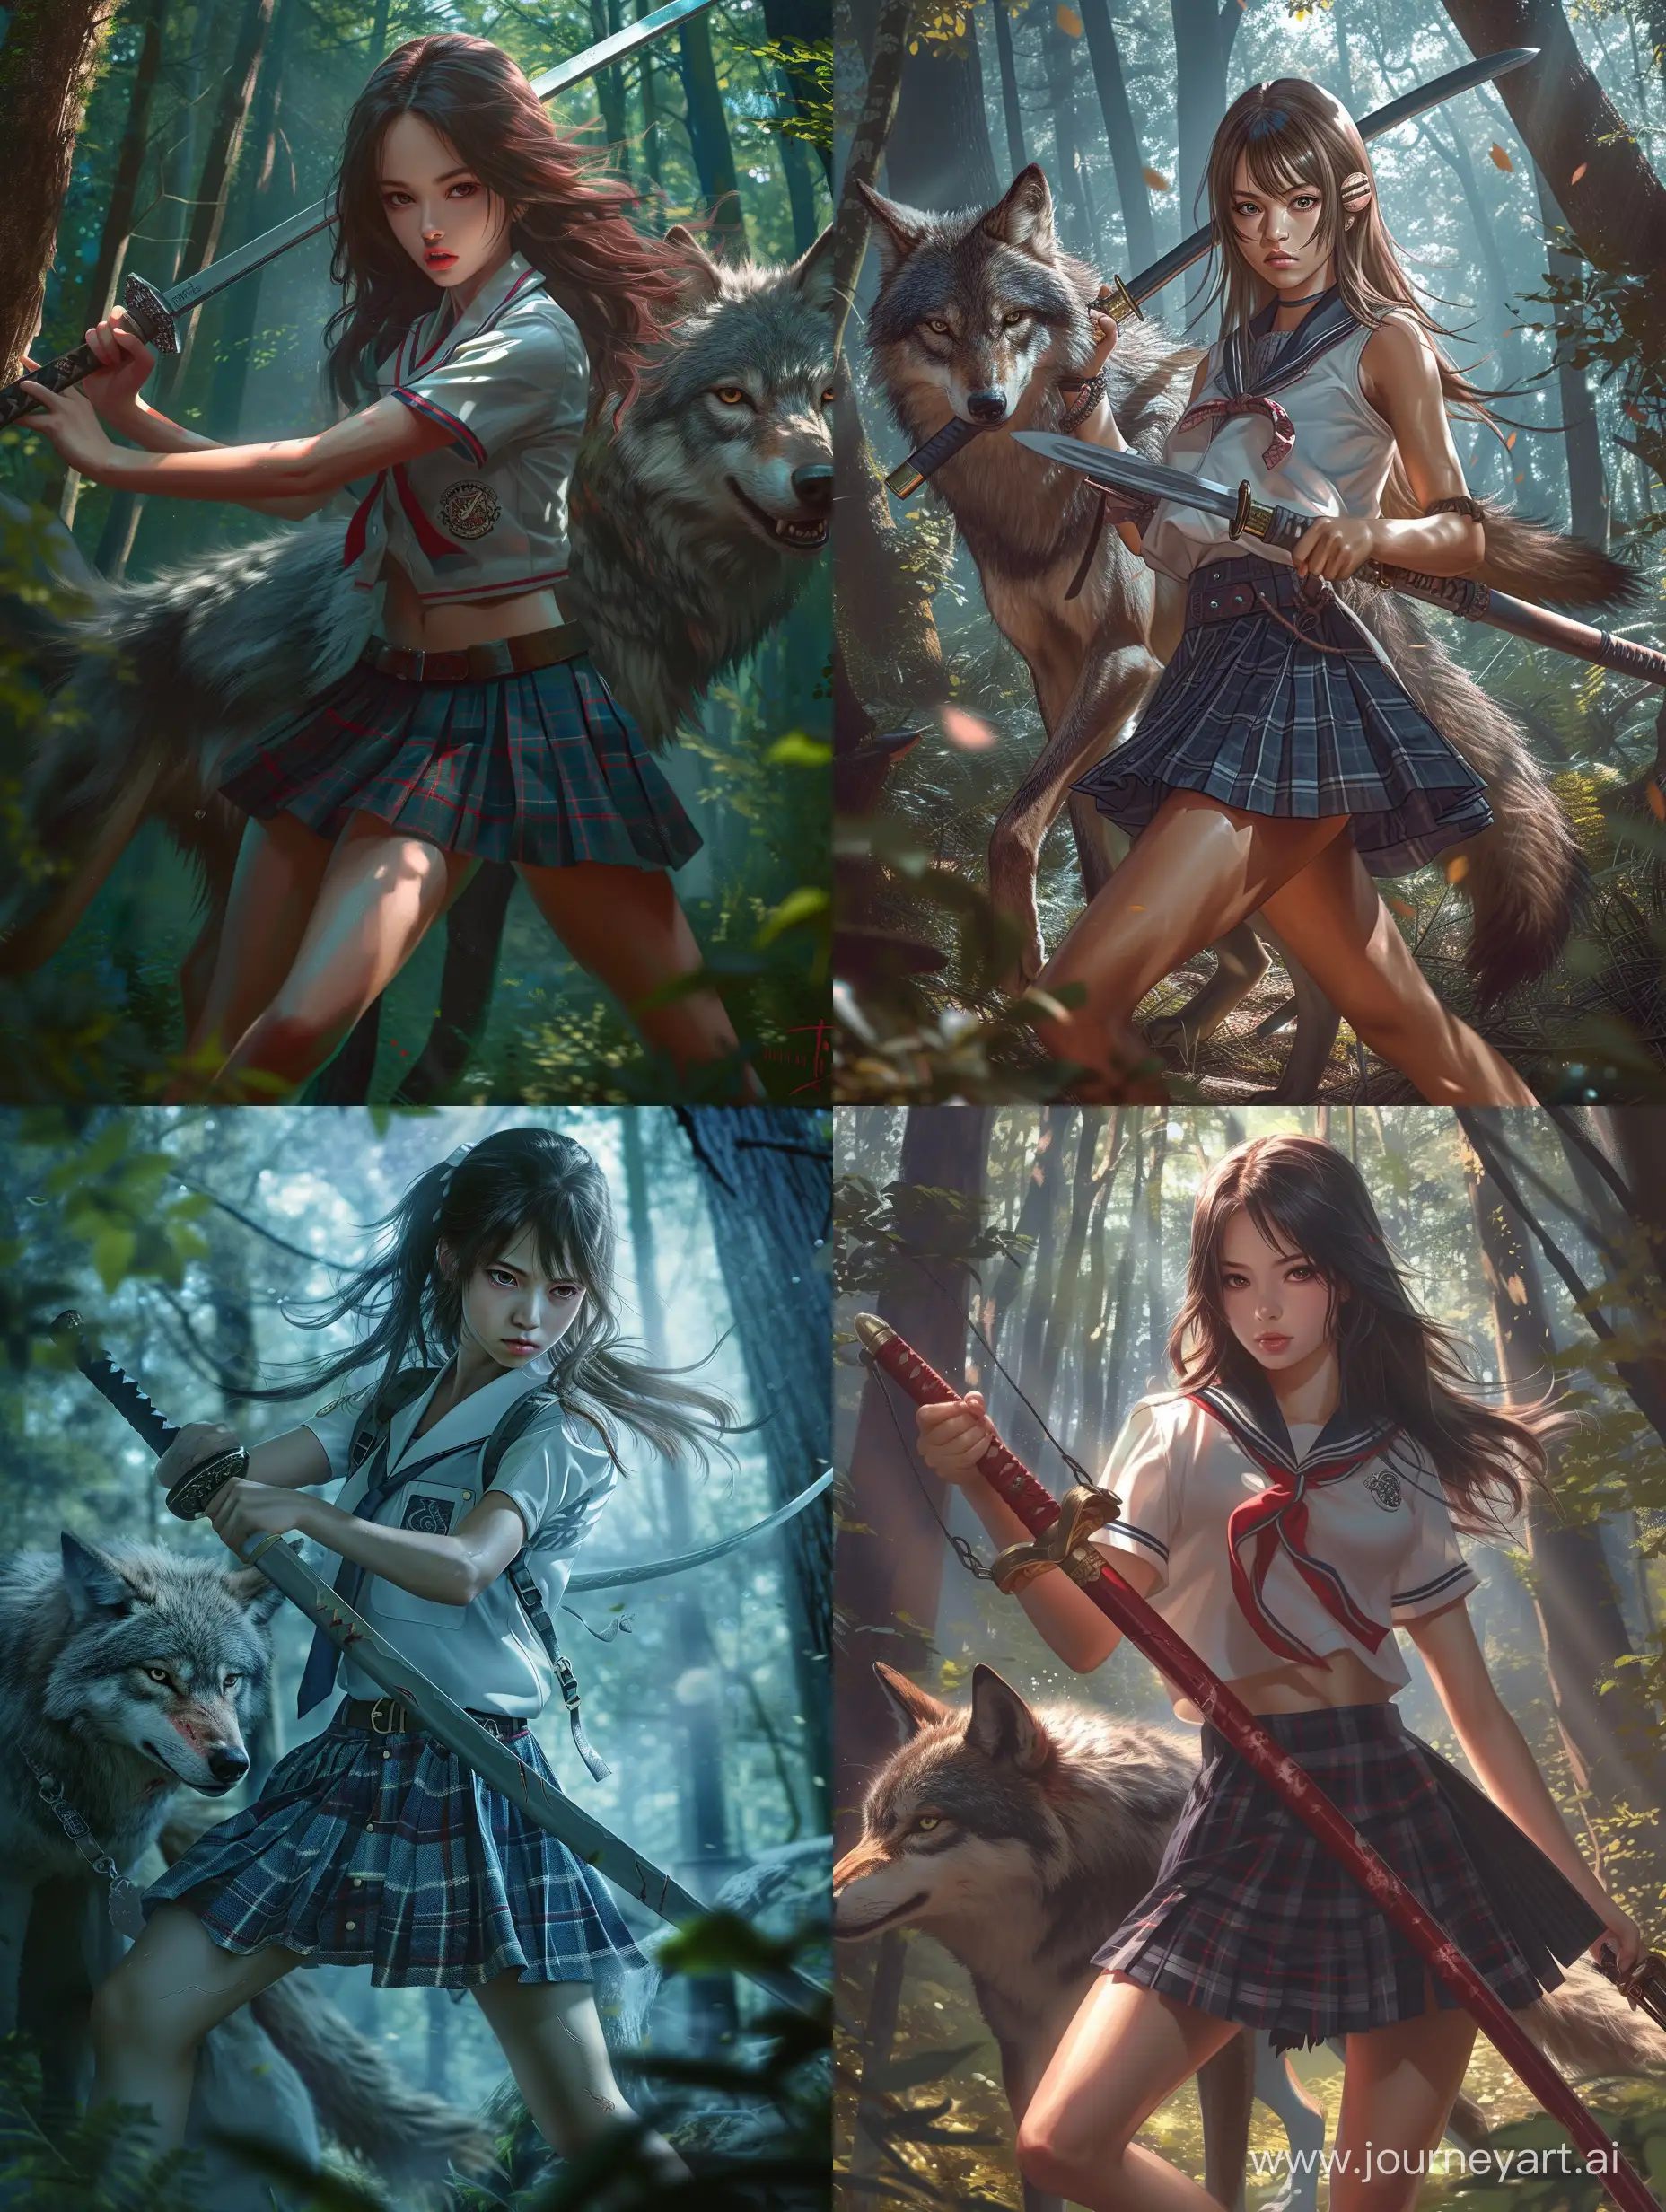 a girl in a high school student uniform and skirt is holding on her sword, with a wolf, in the forest, detailed background, in the style of photorealistic detailing, anime-inspired characters, transfixing marine scenes, hyper-realistic sculptures, traditional japanese art, dramatic use of shadows